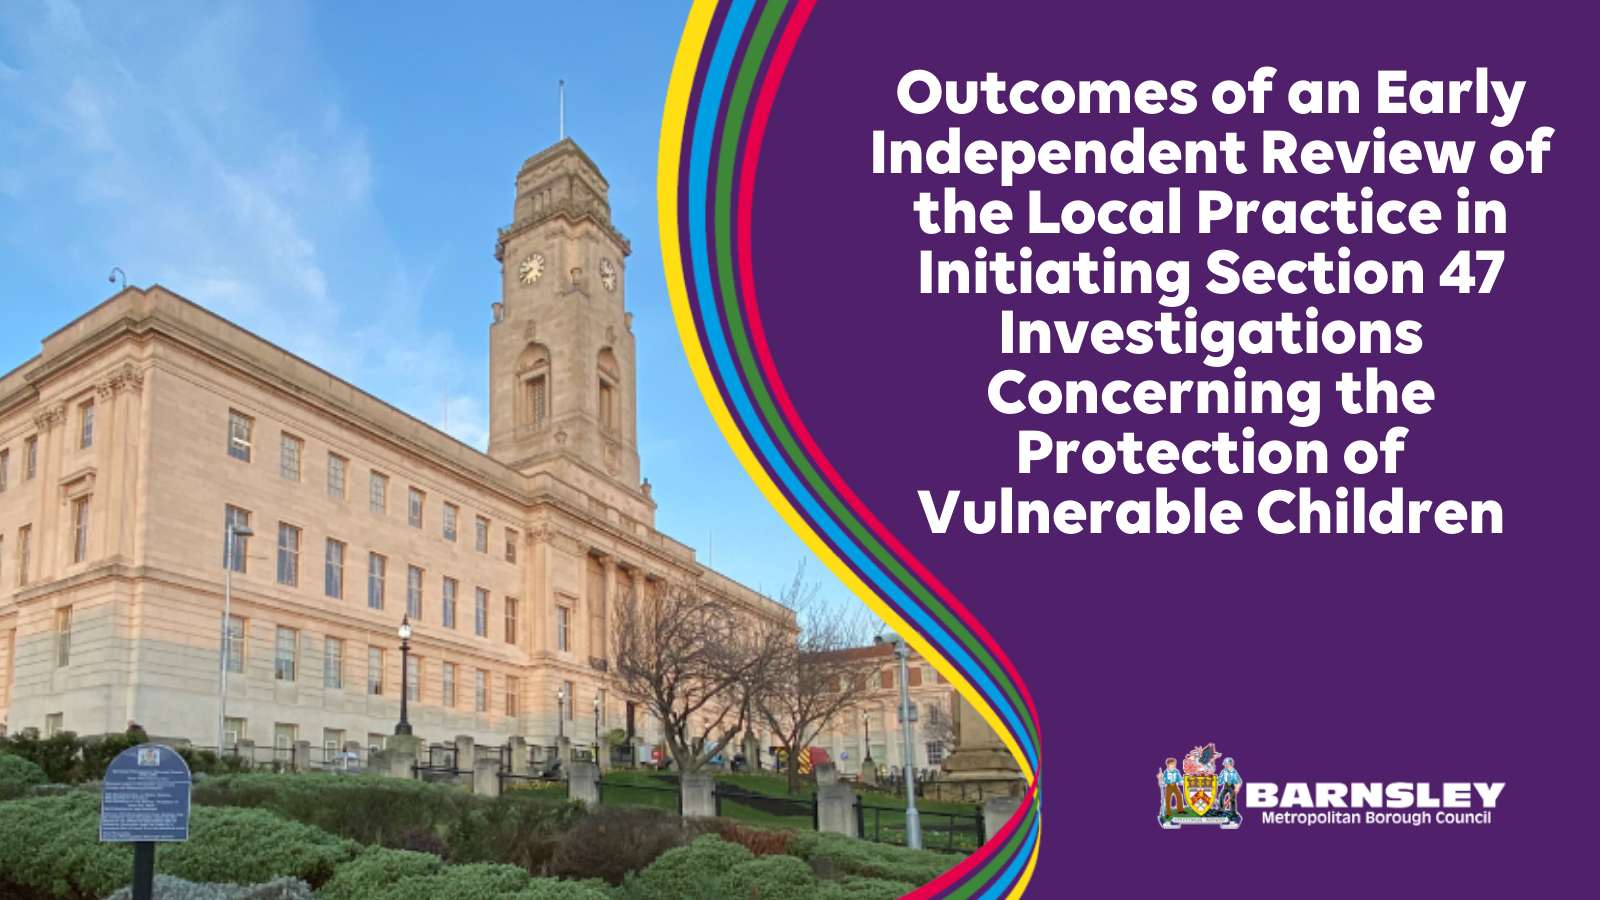 Outcomes of an Early Independent Review of the Local Practice in Initiating Section 47 Investigations Concerning the Protection of Vulnerable Children